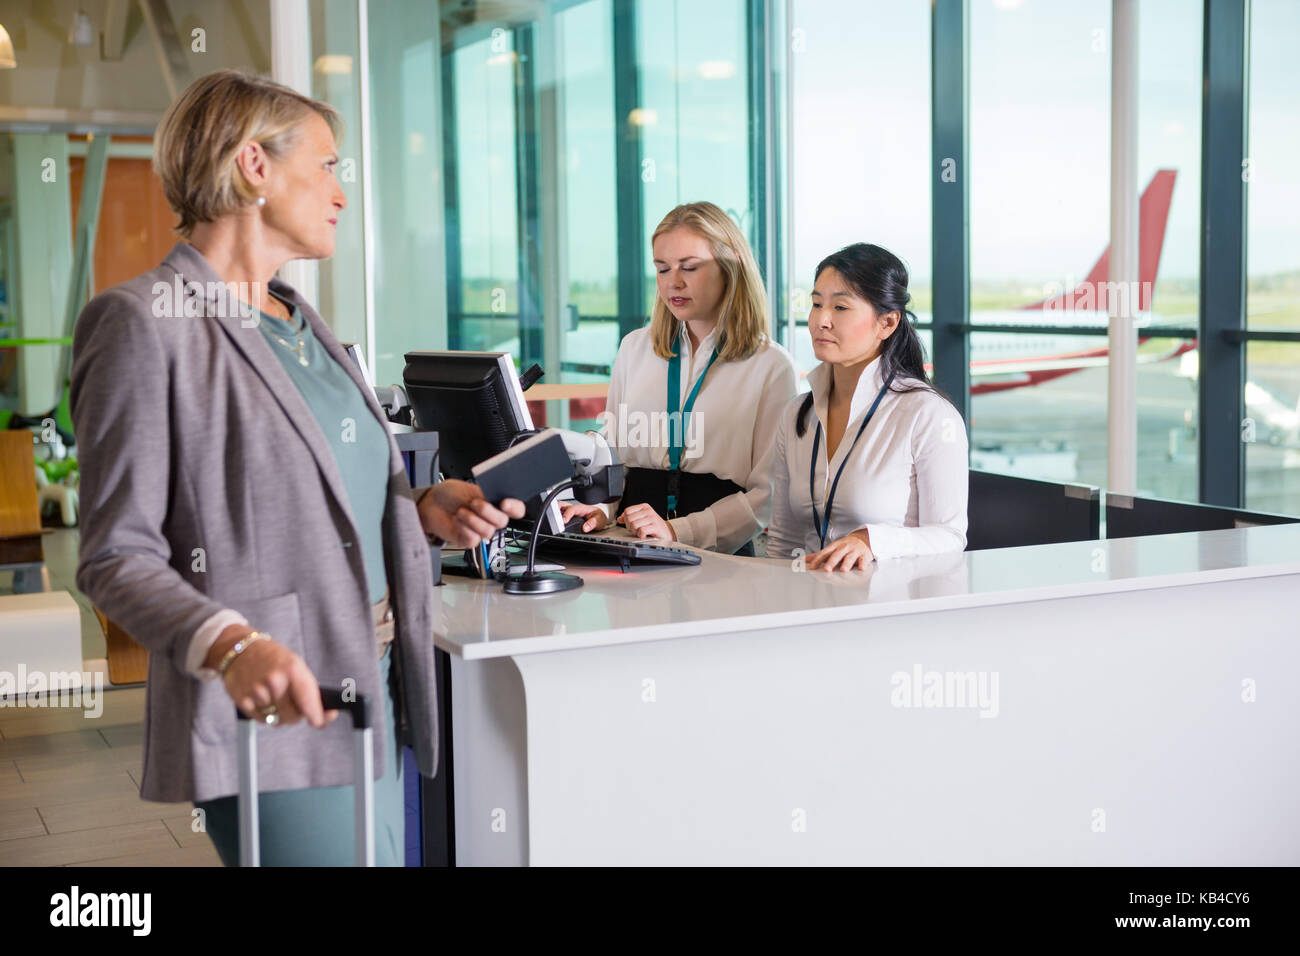 Female passenger holding passport while looking at receptionists working at counter in airport Stock Photo